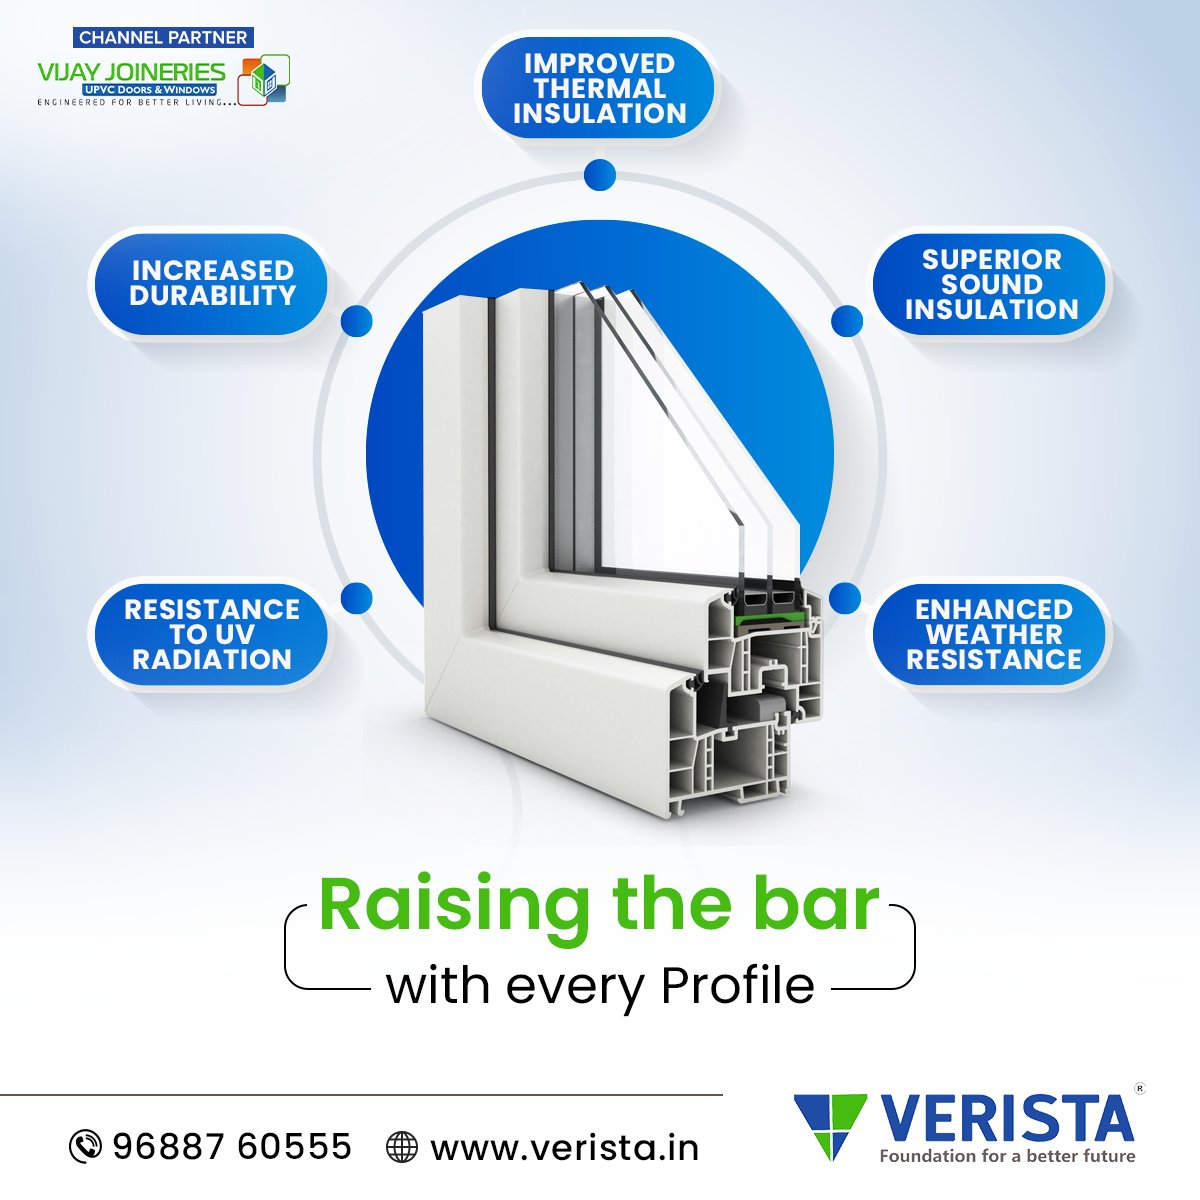 Raising the bar with every profile 

✅Improved Thermal
✅Superior Sound Insulation

#upvc #upvcprofile ##thermal #resistance #improvedthermal #sound #veristaupvc #verista #bar #raising #tamilnadu #salem #upvcprofiles #upvcprofilesupplier #upvcprofilesmanufacturers